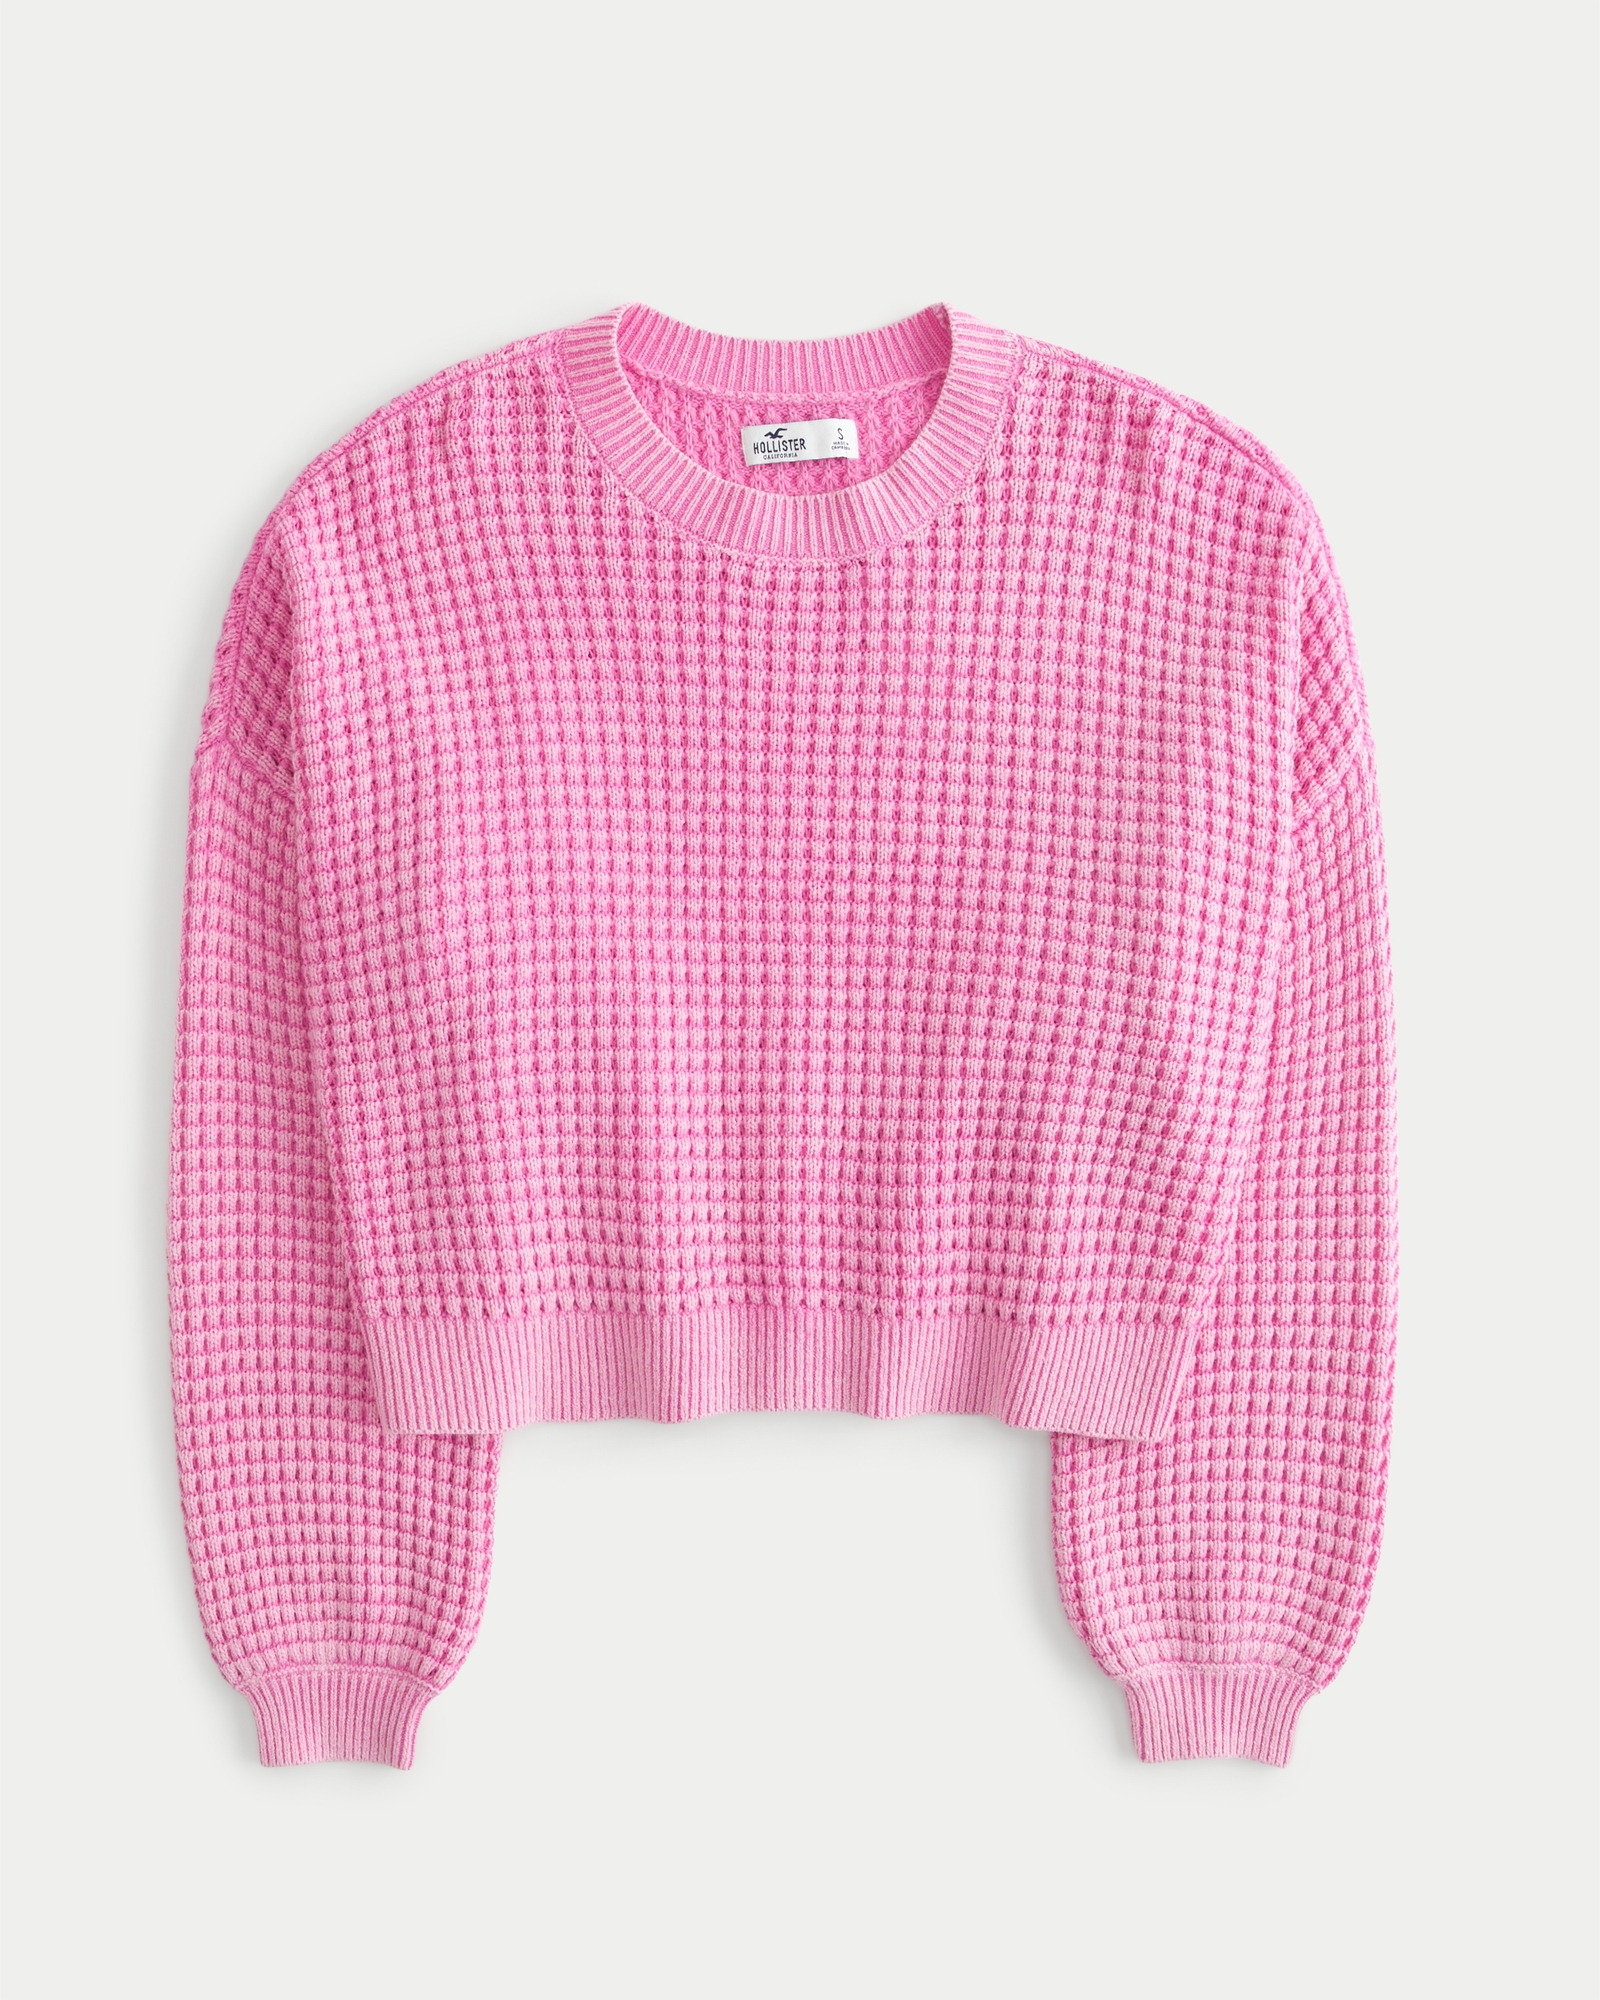 Hollister knitted crop top in pink